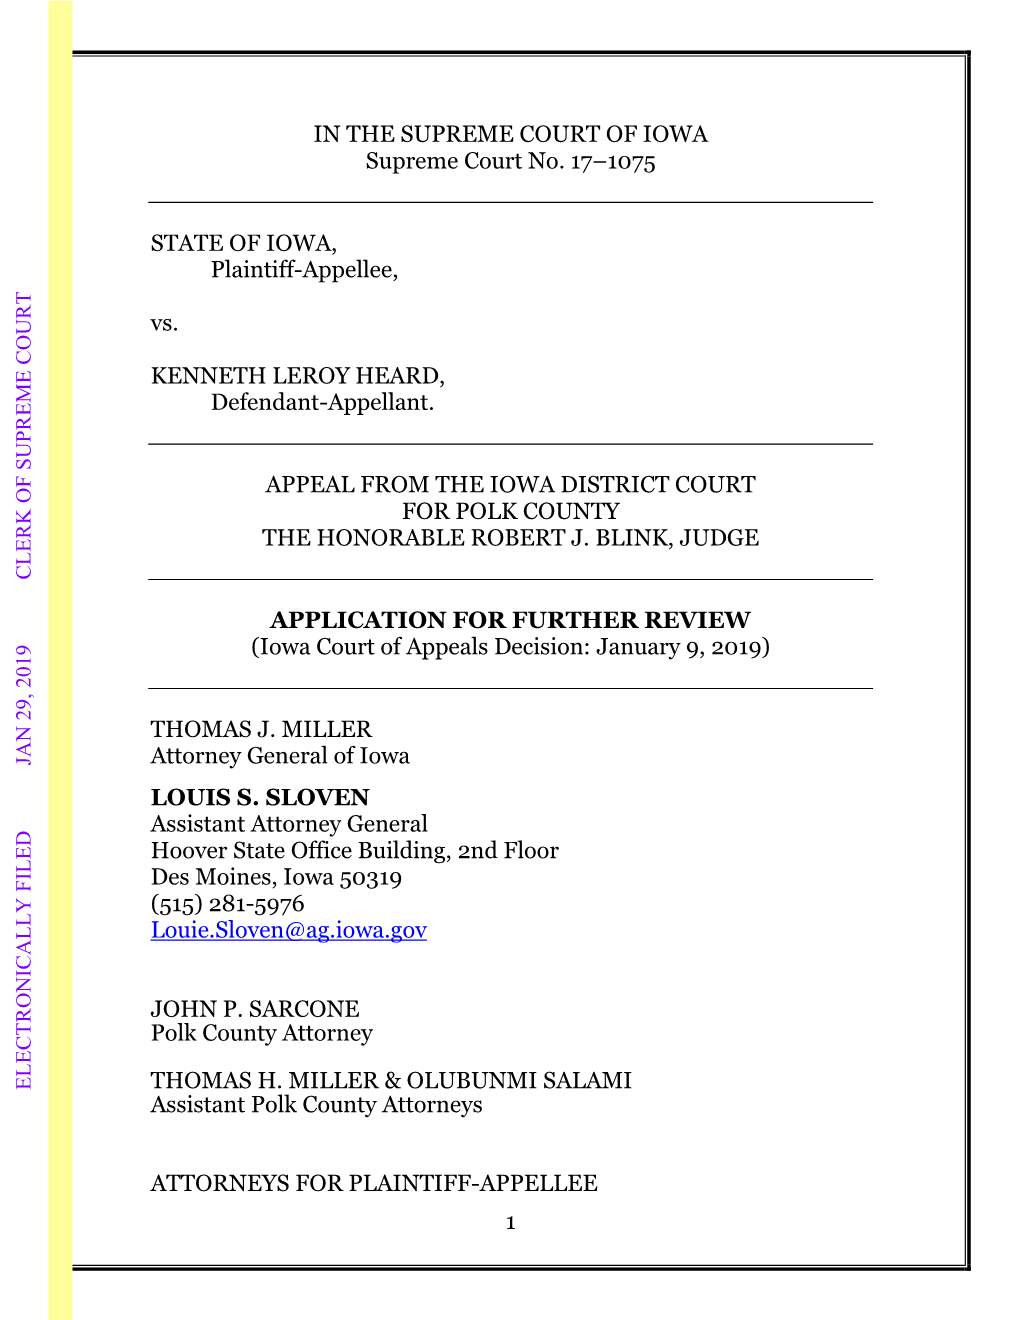 APPLICATION for FURTHER REVIEW (Iowa Court of Appeals Decision: January 9, 2019)